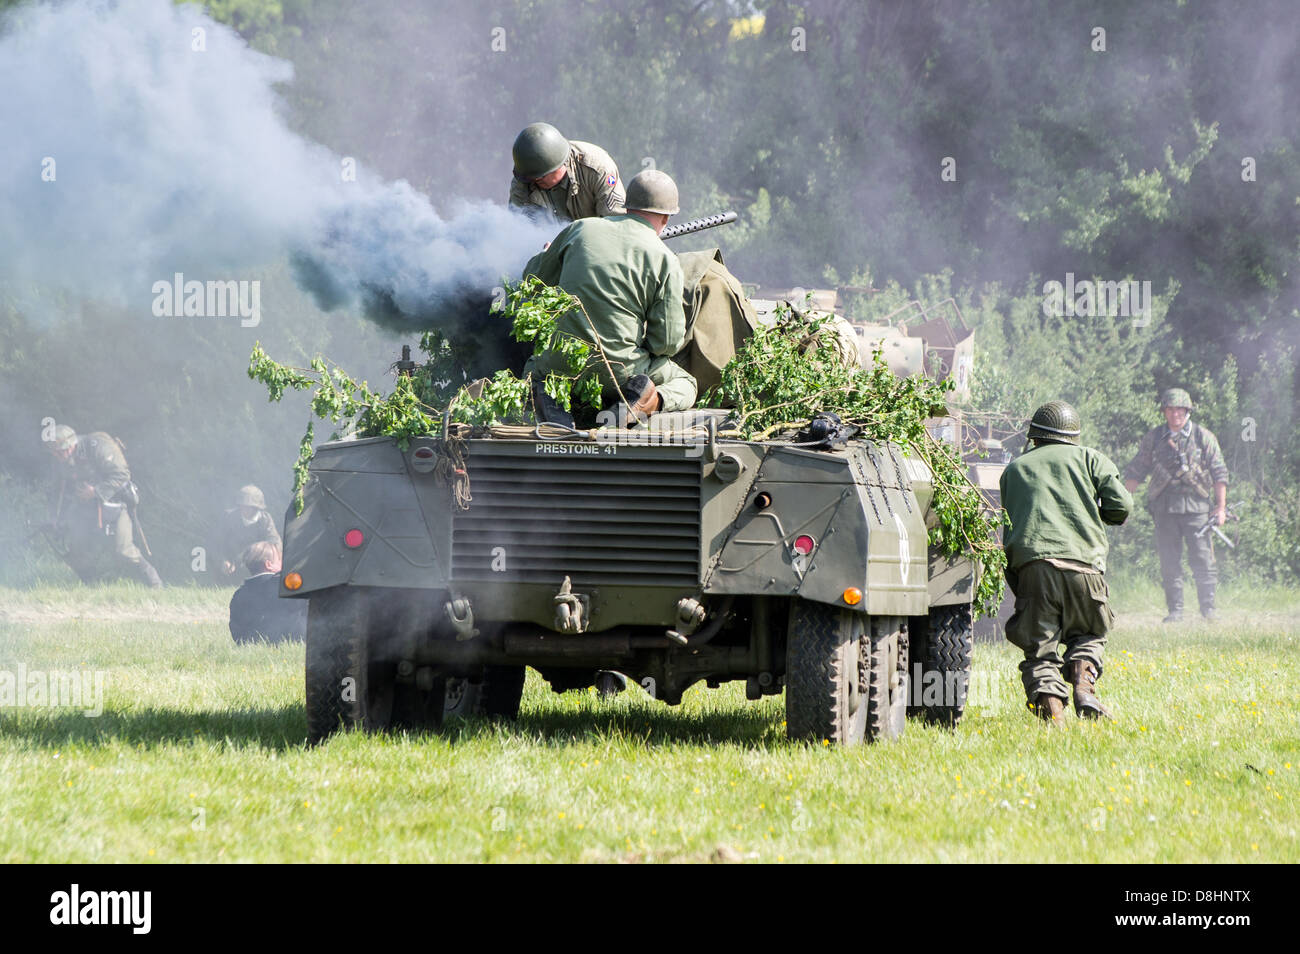 Overlord, D-Day re-enactment at Denmead 2013. American M8 Greyhound Armoured car advancing with troops with smoke pouring out. Stock Photo